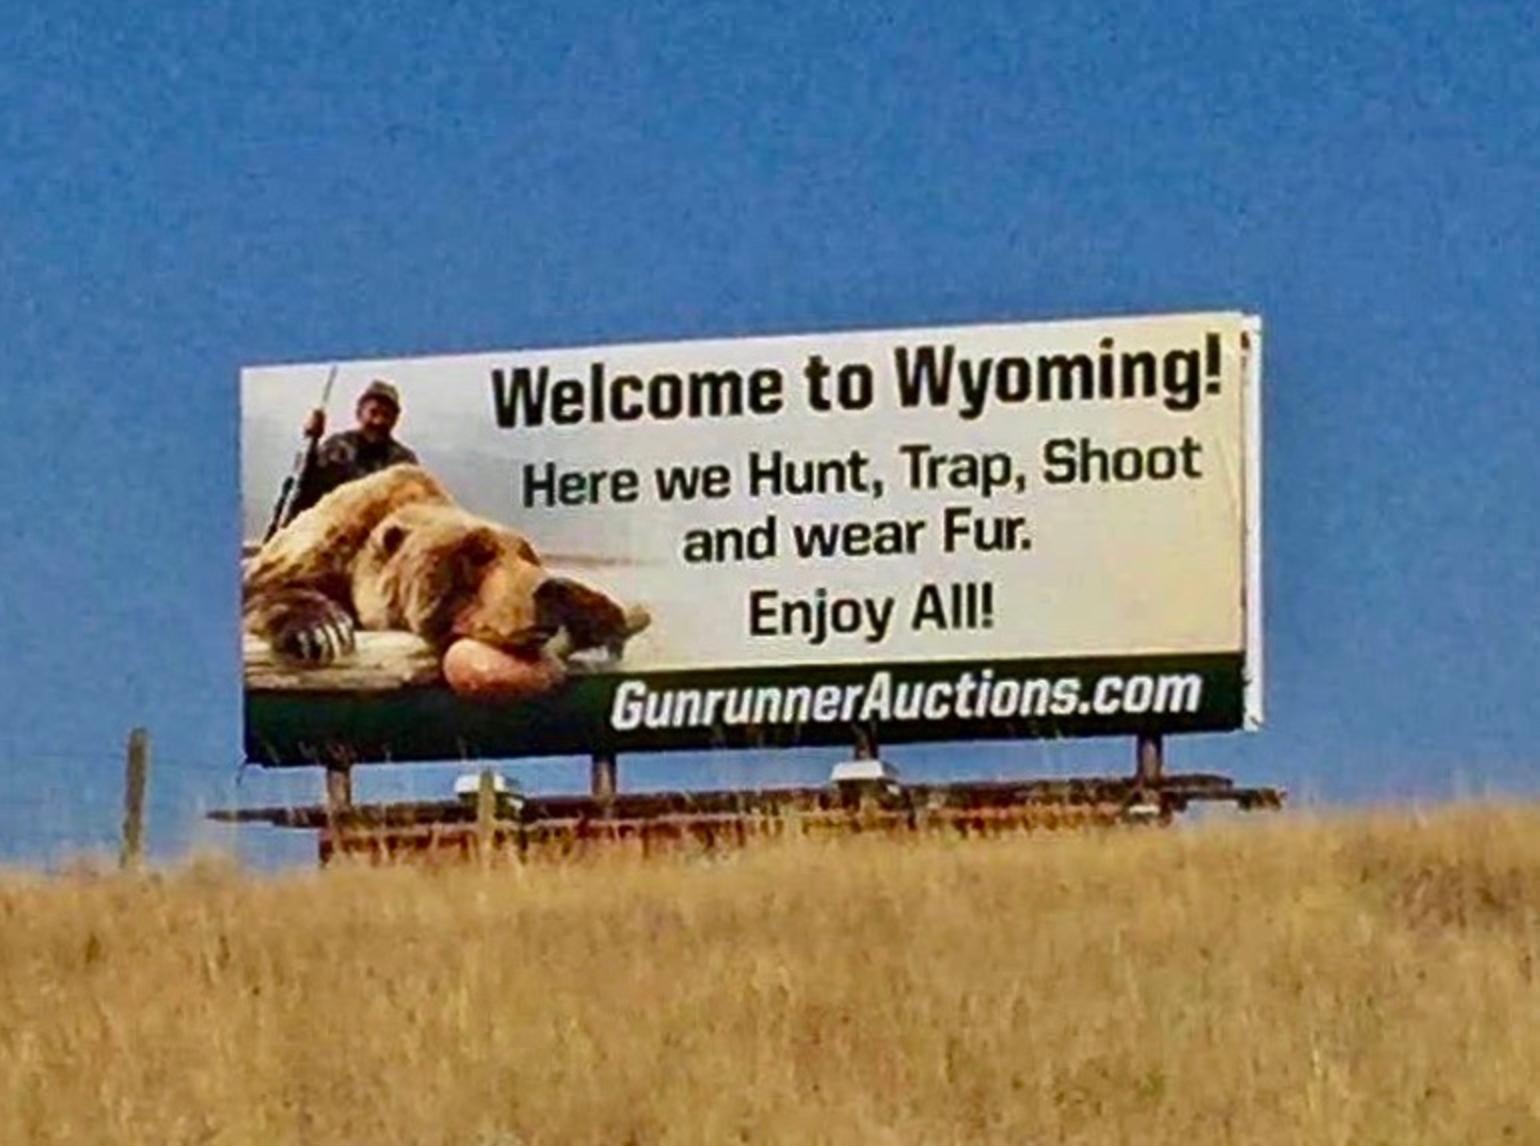 A billboard that greeted locals and tourists outside Cody, Wyoming, indicative of two different worldviews clashing over differing ideas about how to best manage bears.